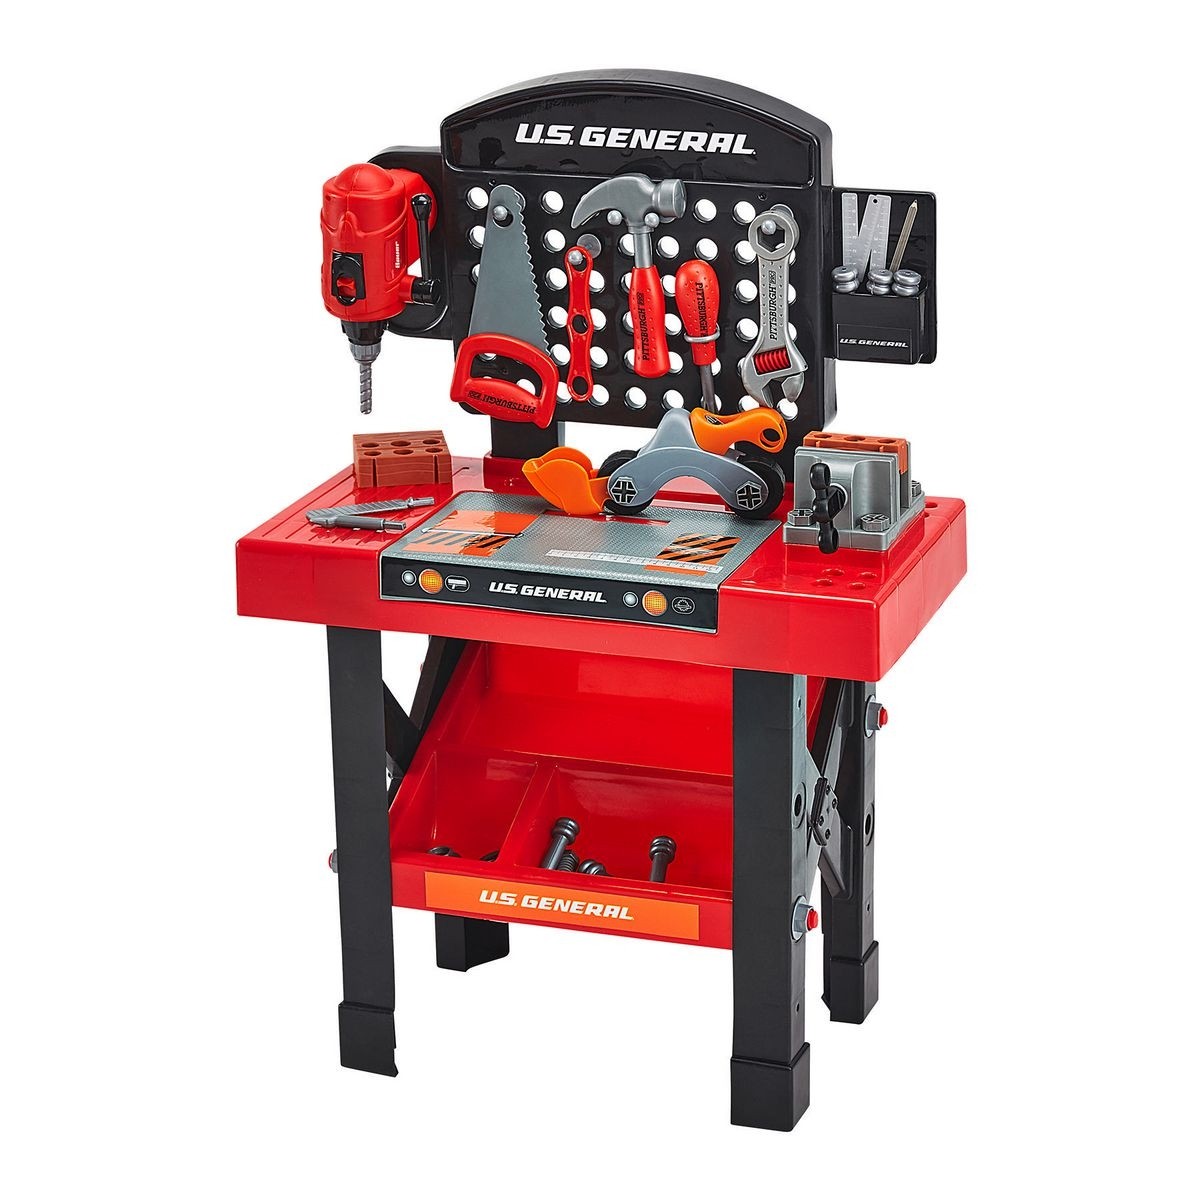 U.S. GENERAL JUNIOR Toy Workbench – Item 56515 – Harbor Freight Coupons